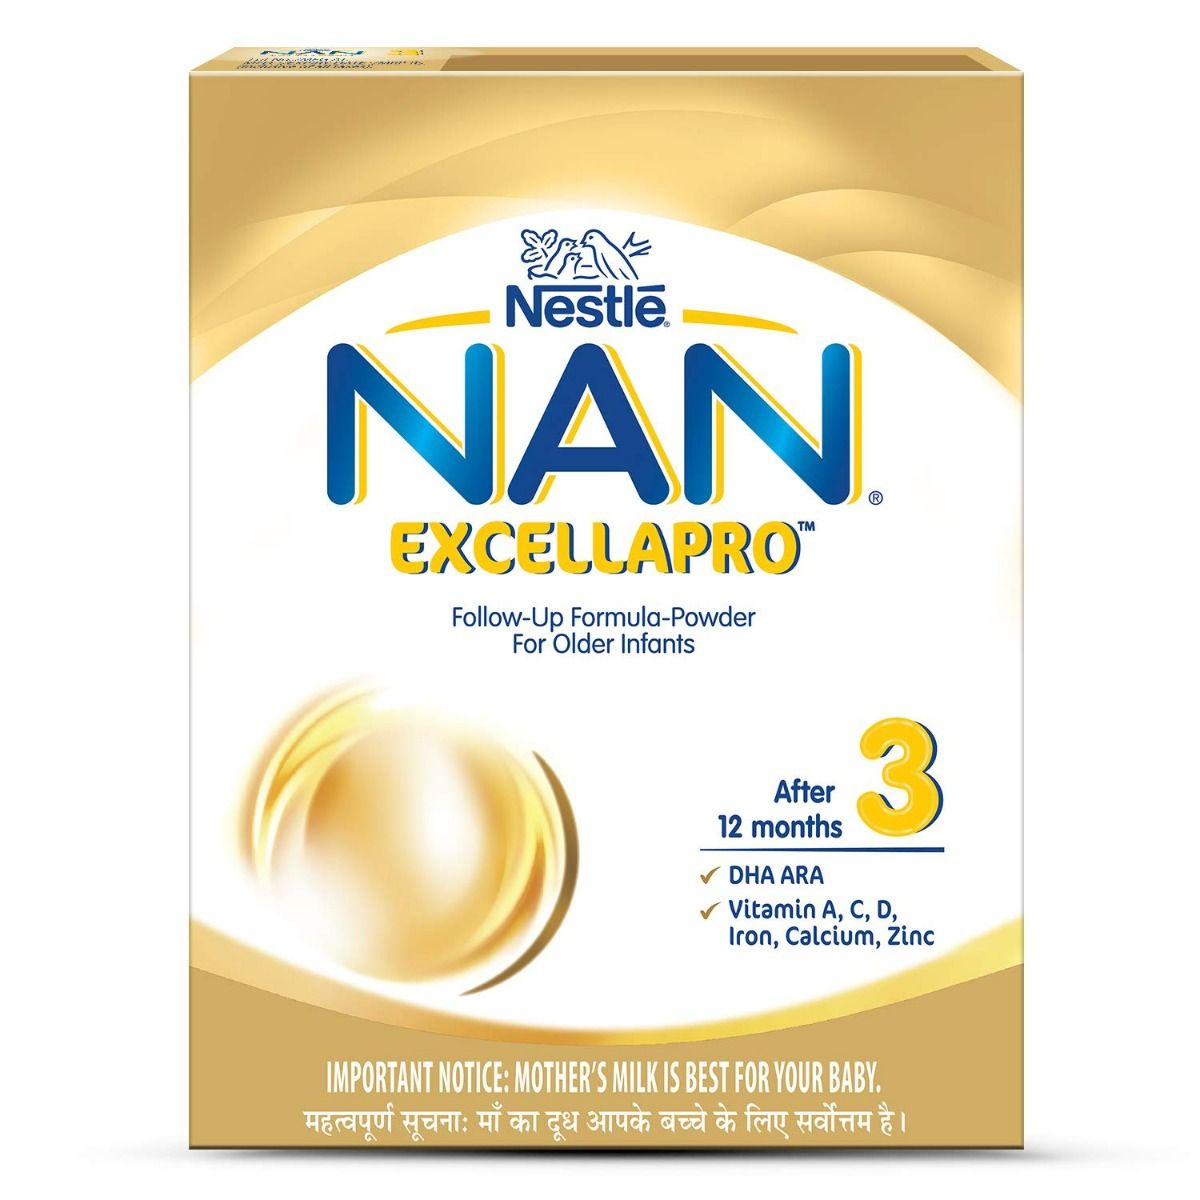 Nestle Nan Excellapro Follow-Up Formula, Stage 3, After 12 months, 400 gm Refill Pack, Pack of 1 